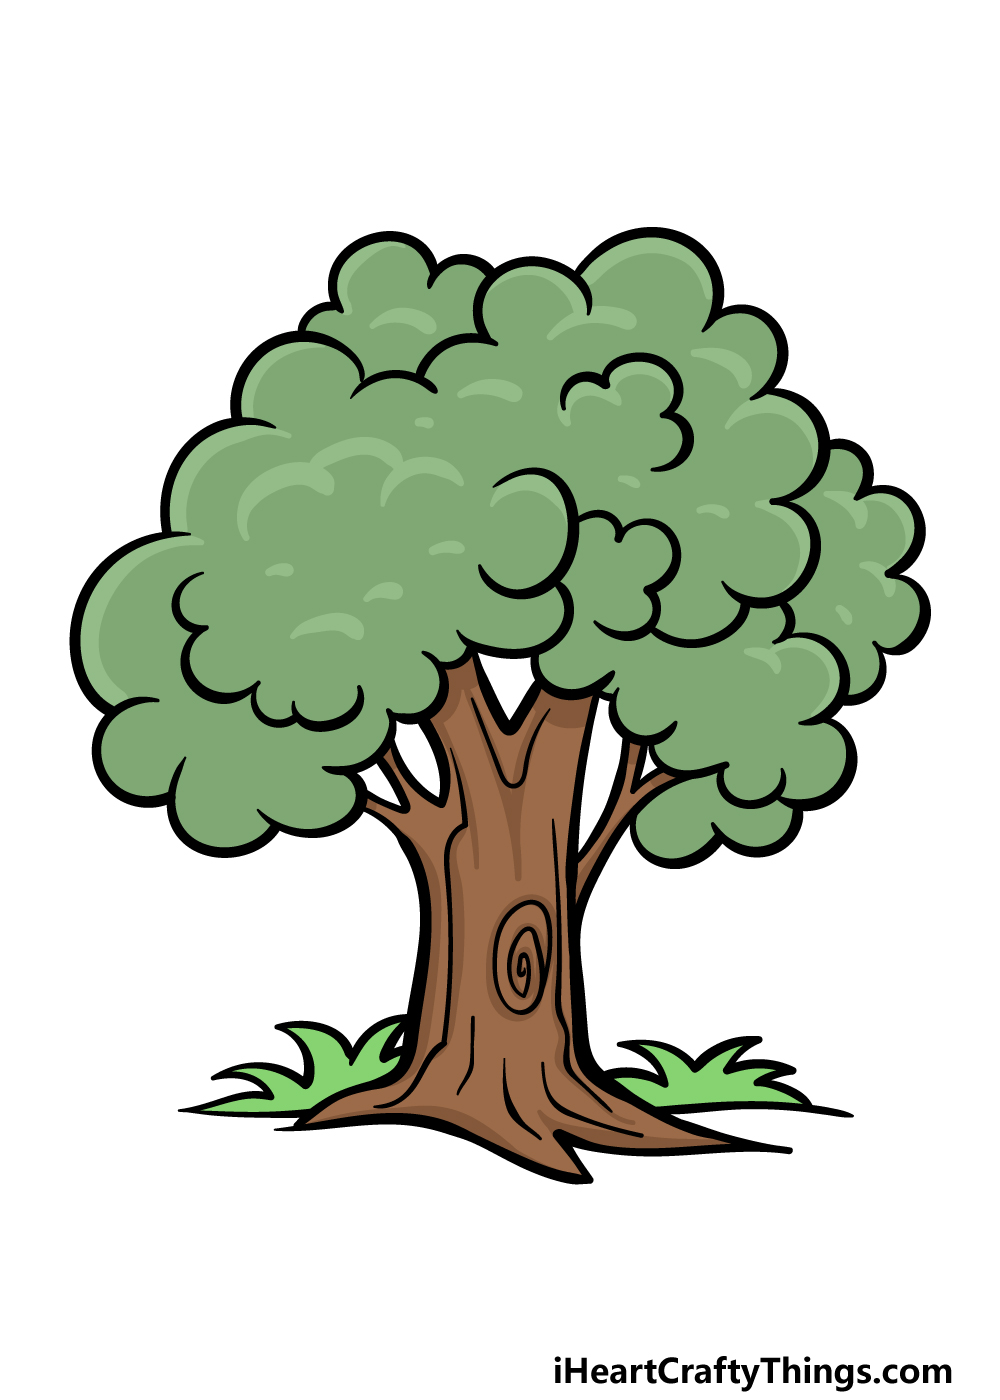 How To Draw A Cartoon Tree – A Step by Step Guide